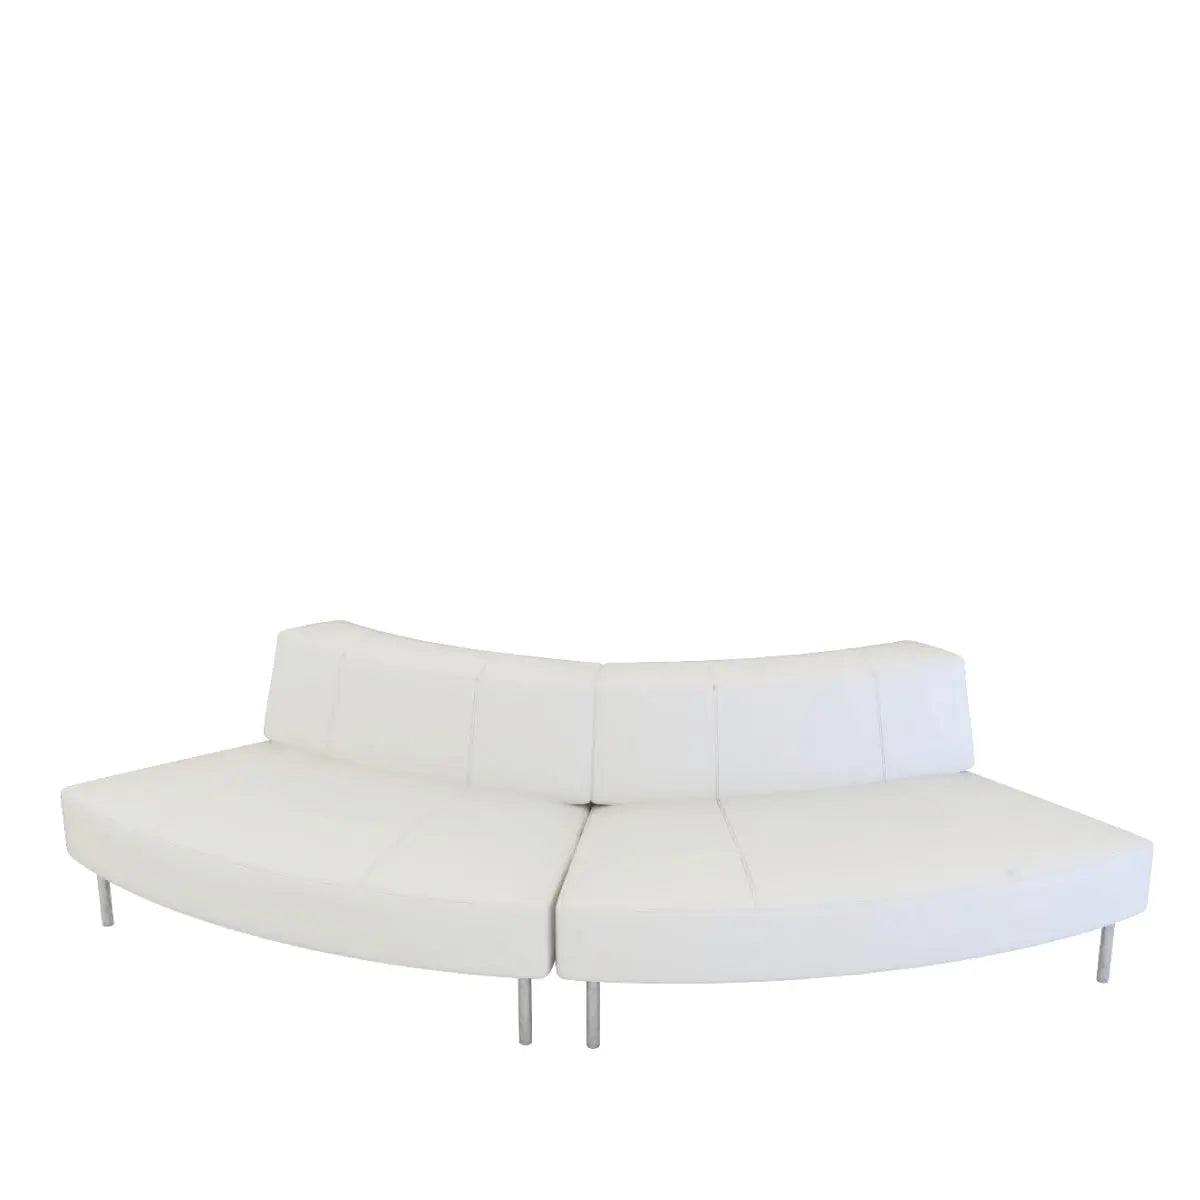 Endless 5 seater curved sofa with small low back Desert River Rentals